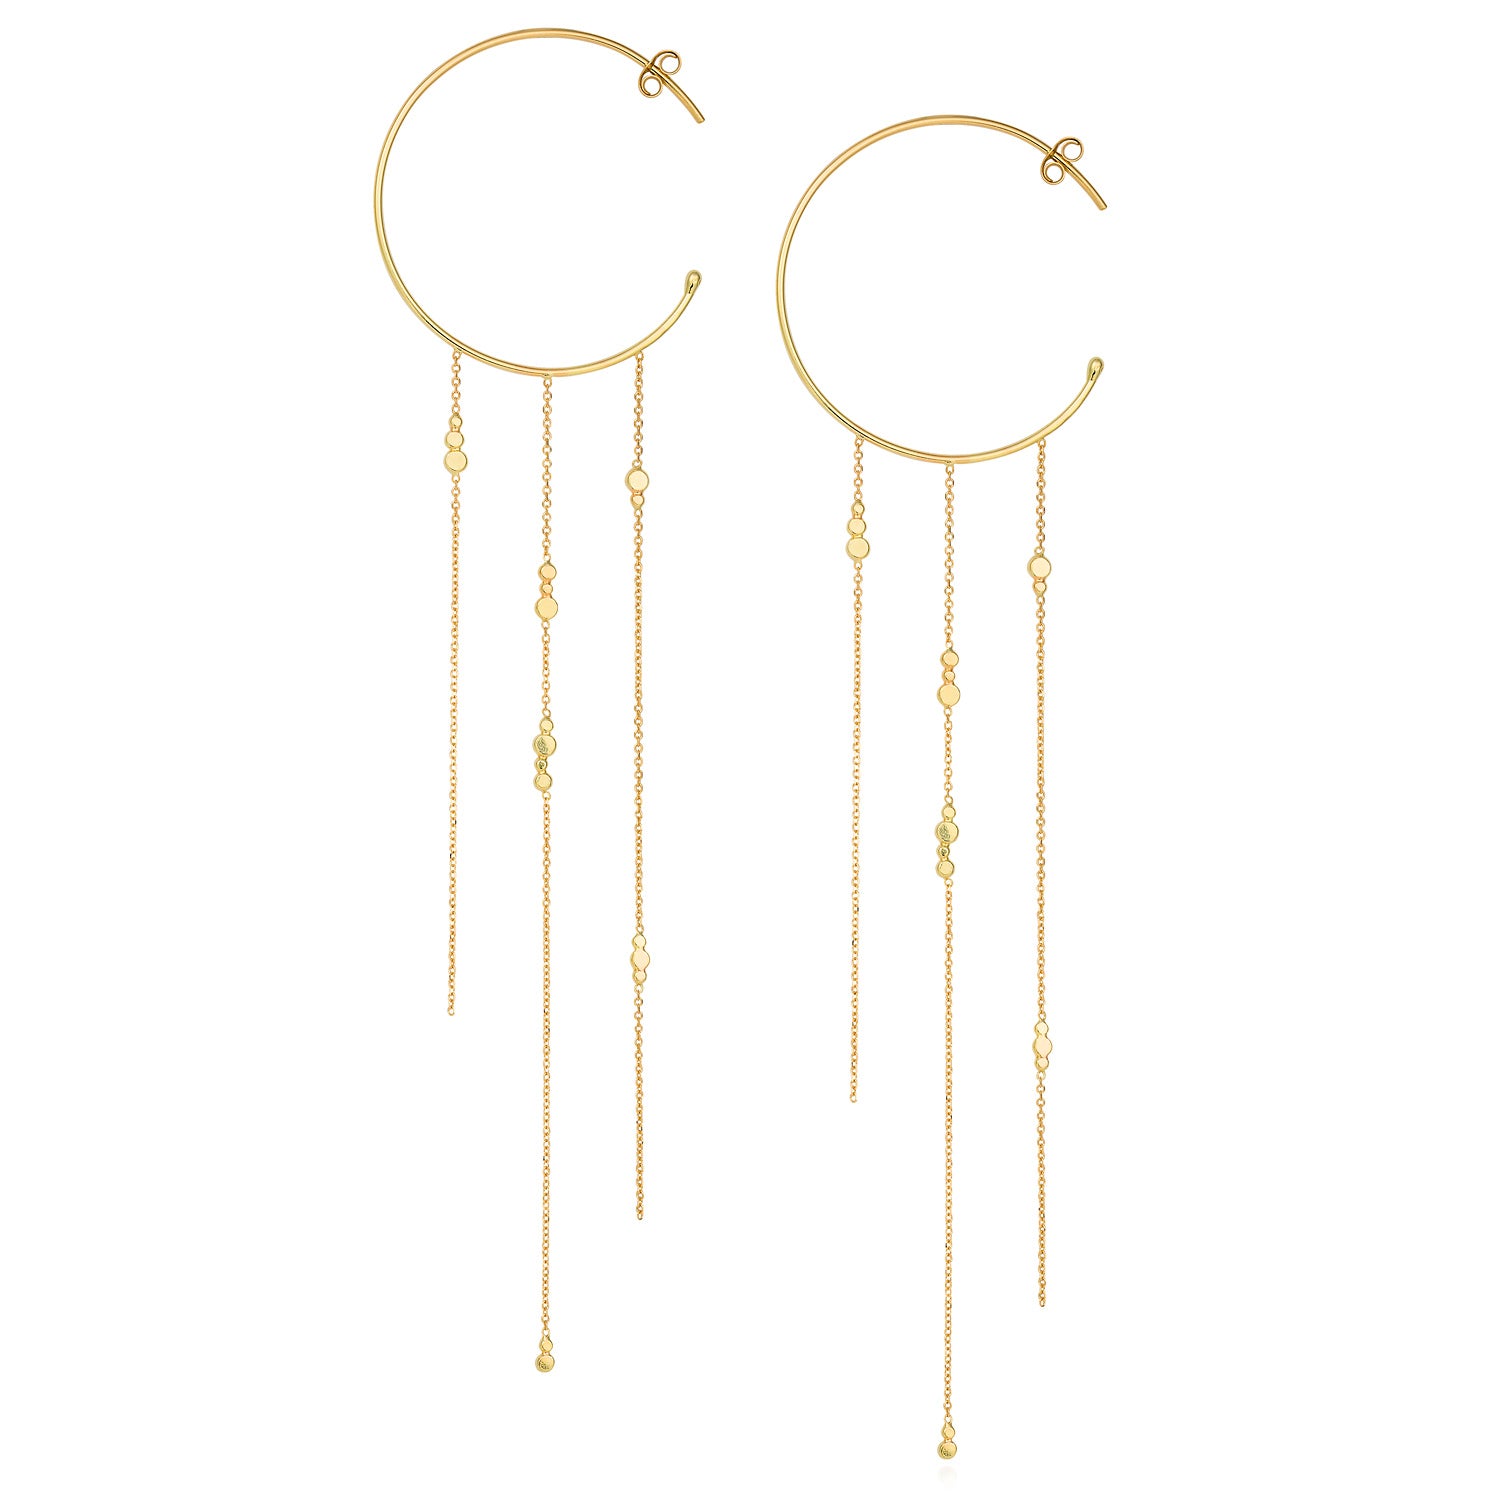 18ct yellow gold hoop earrings with 3 strands of fine chain with Bits and Bobs